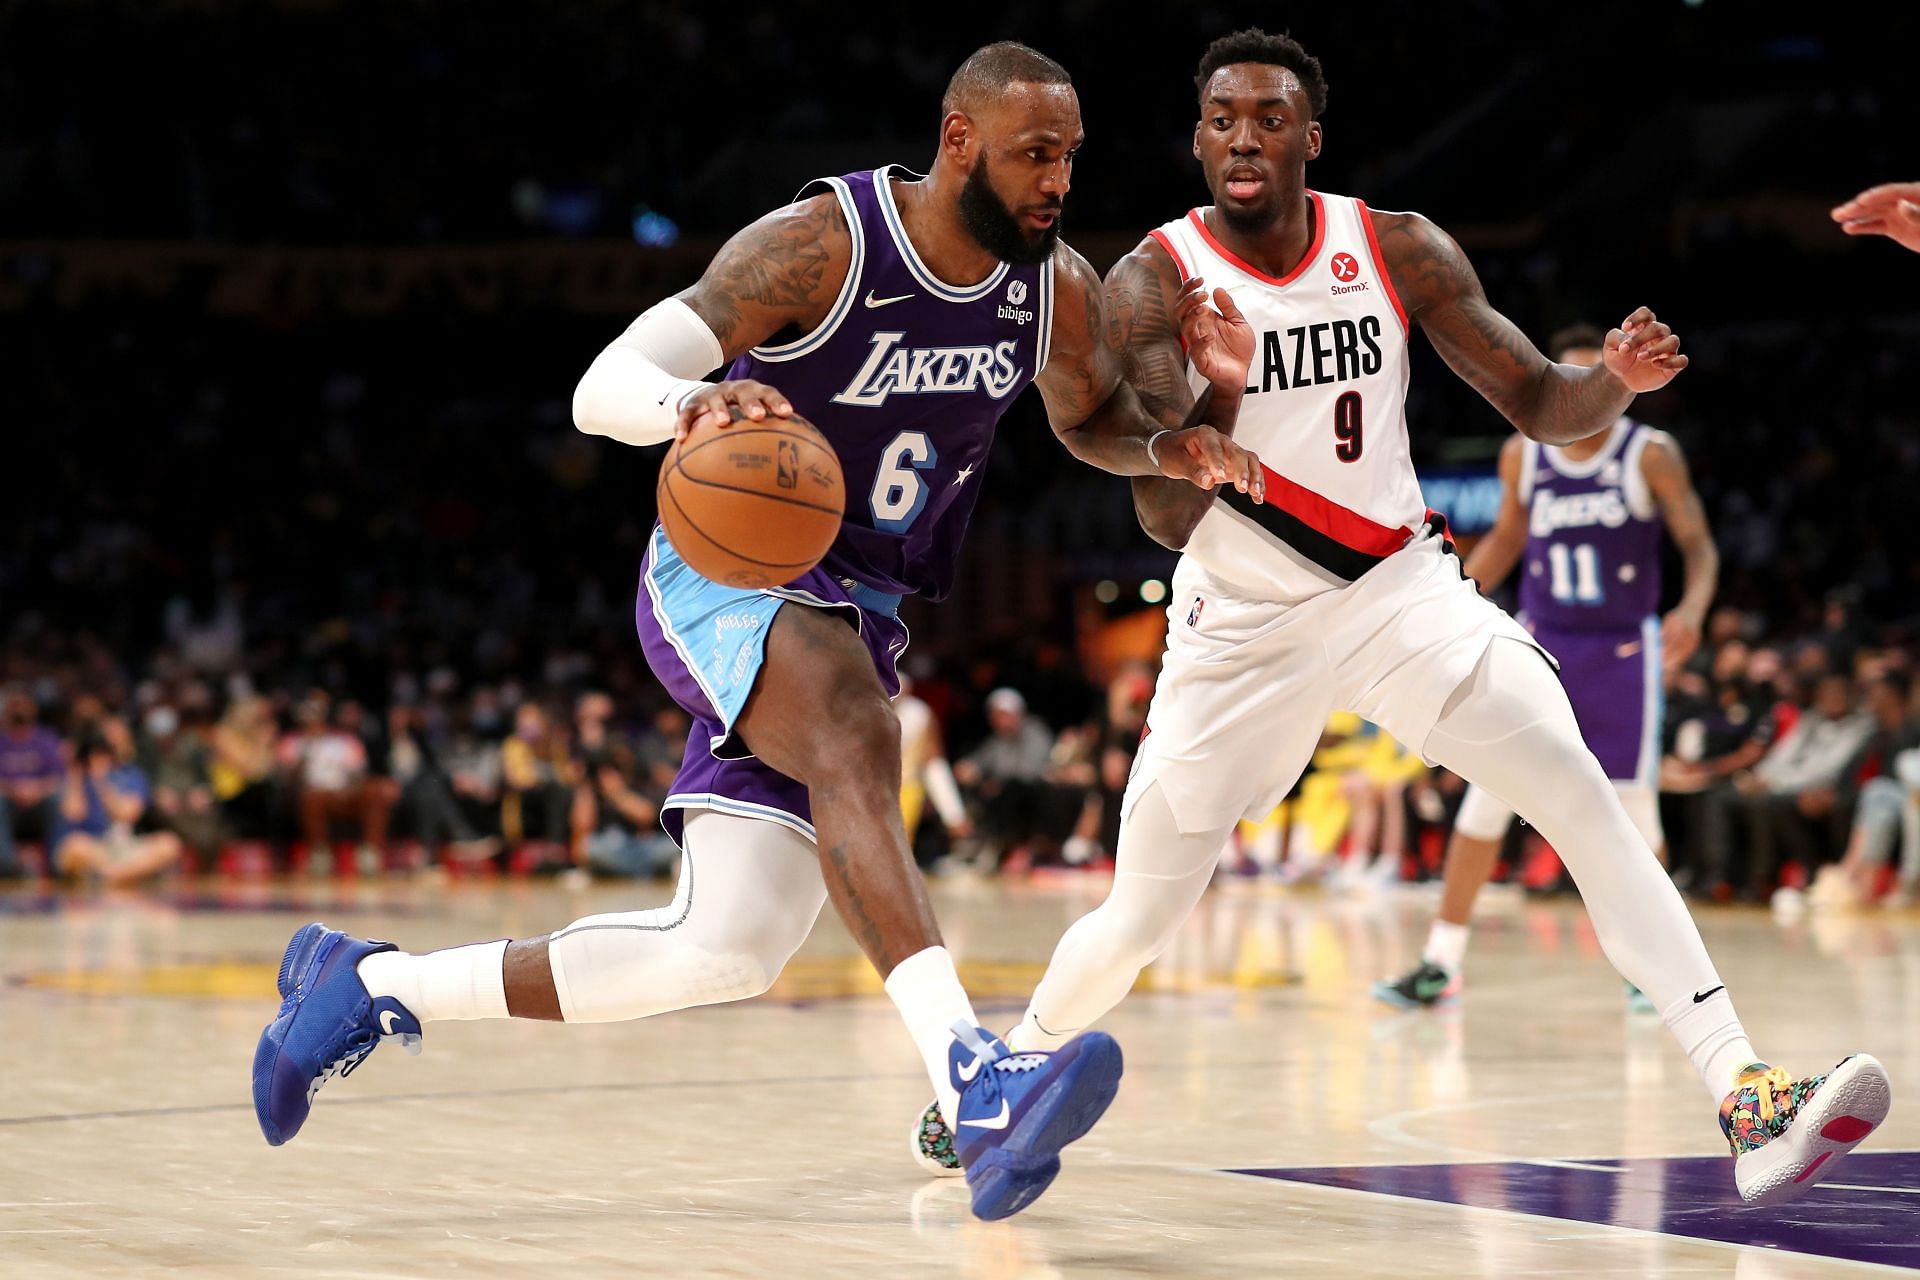 LeBron James #6 of the Los Angeles Lakers drives to the basket against Nassir Little #9 of the Portland Trail Blazers